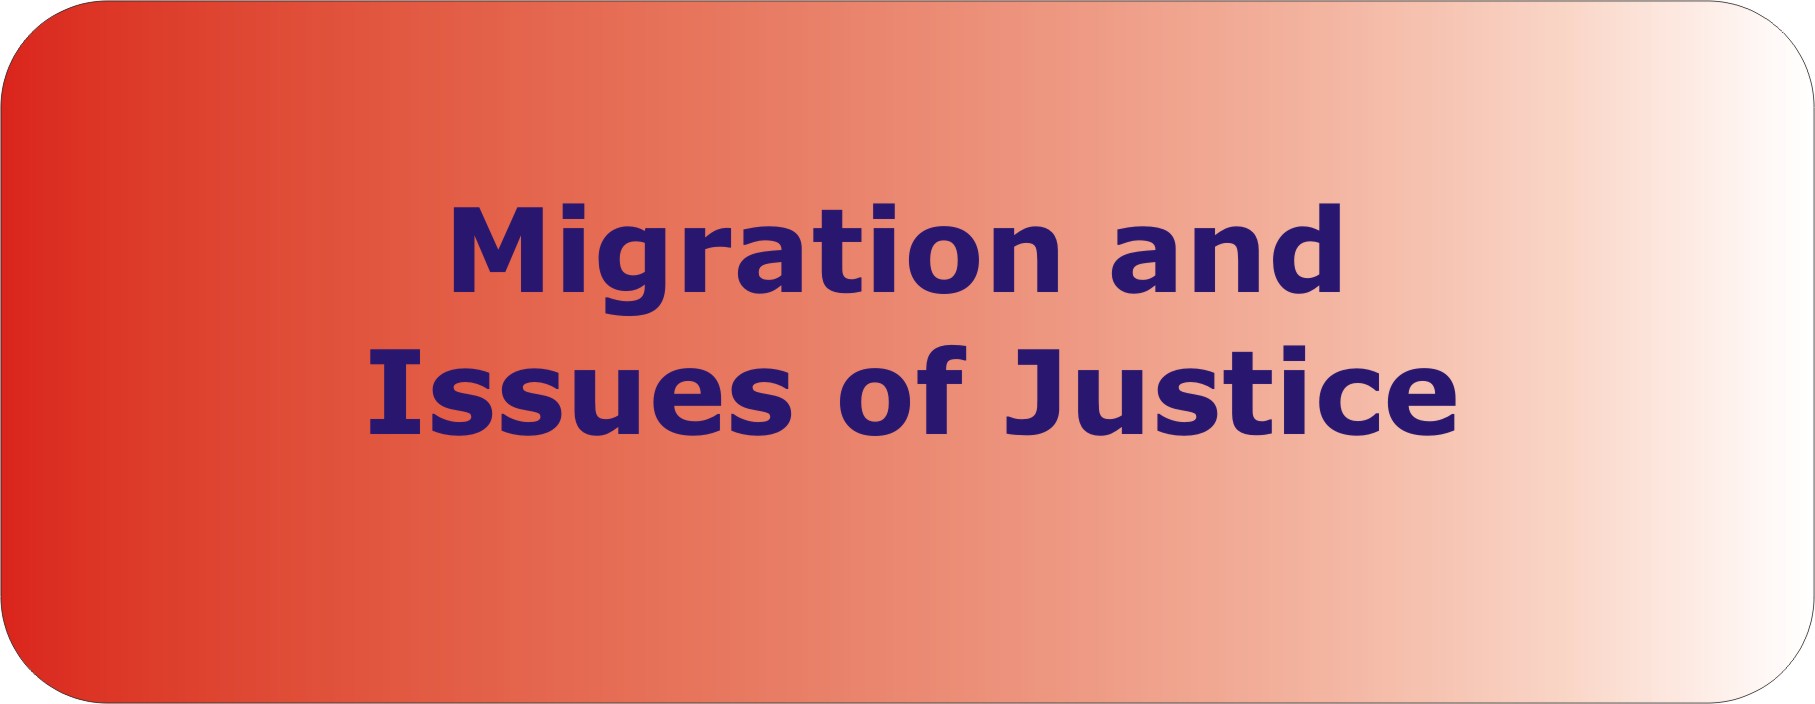 Migration and Issues of Justice